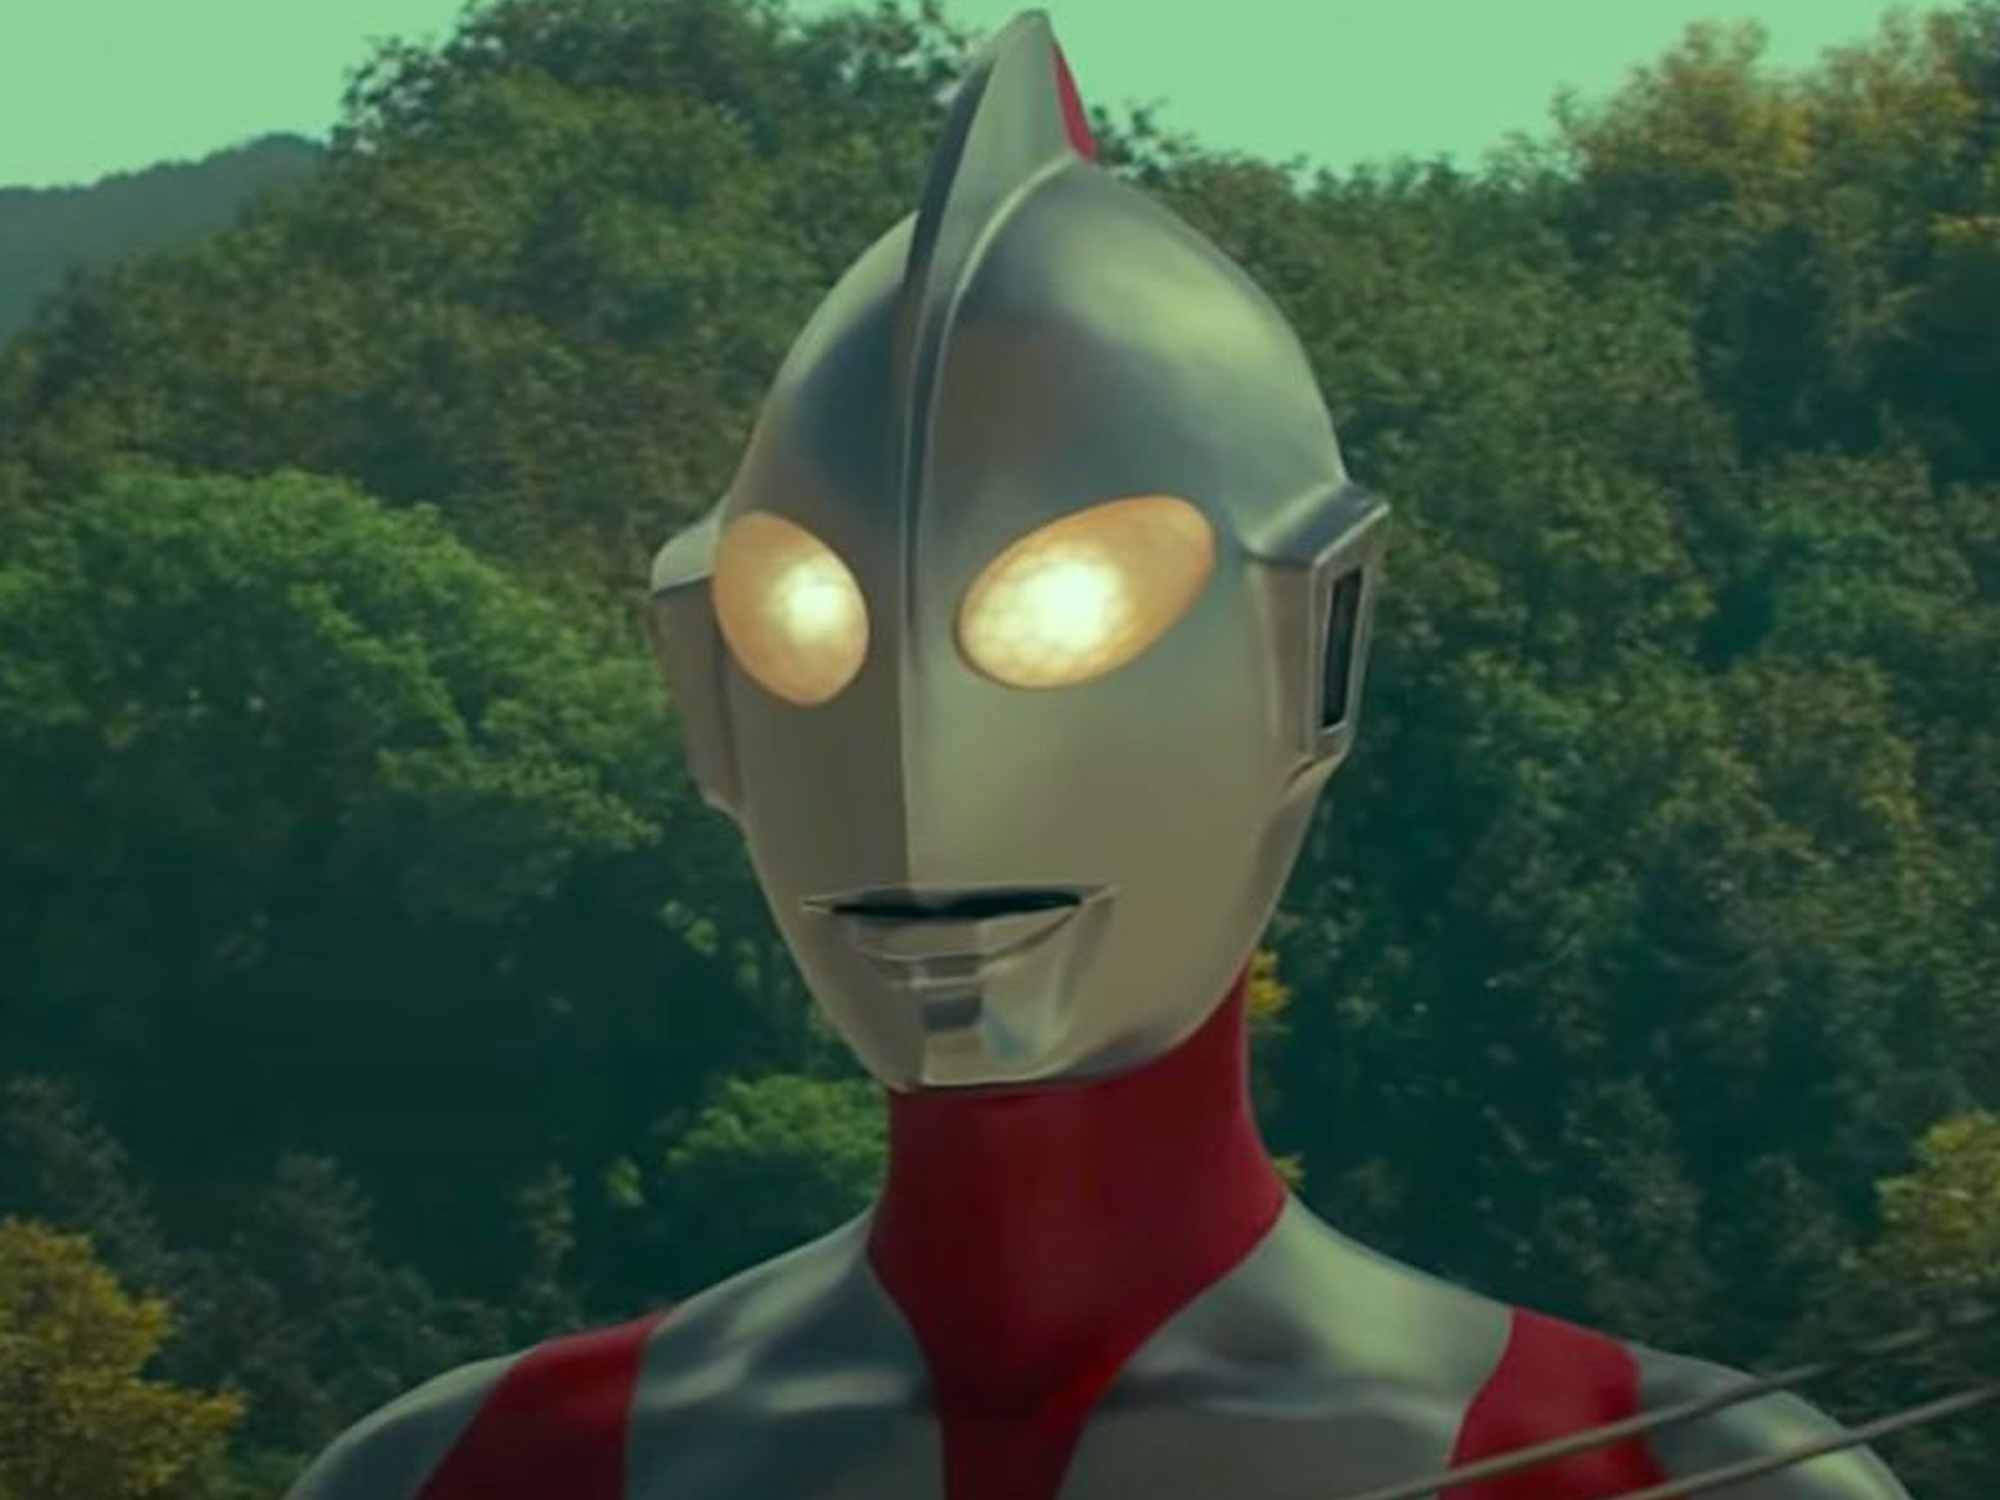 Shin Ultraman is the end result of a profession indebted to a popular